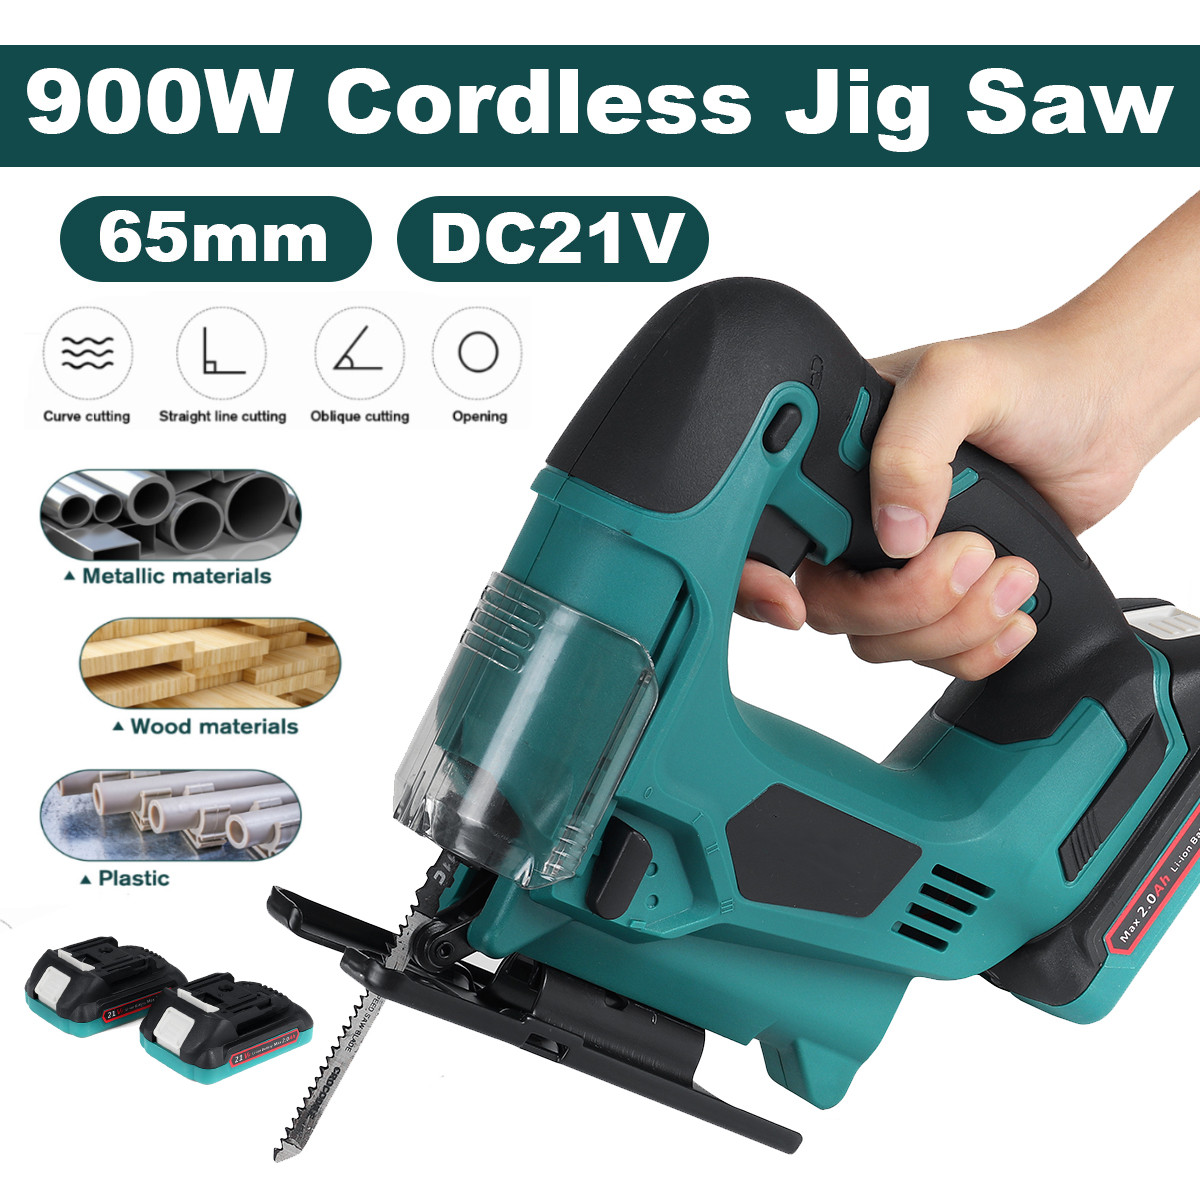 21V-900W-Electric-Jig-Saw-Power-Tool-Cordless-Quick-Blade-Change-Electric-Saw-LED-Light-with-Recharg-1746815-1